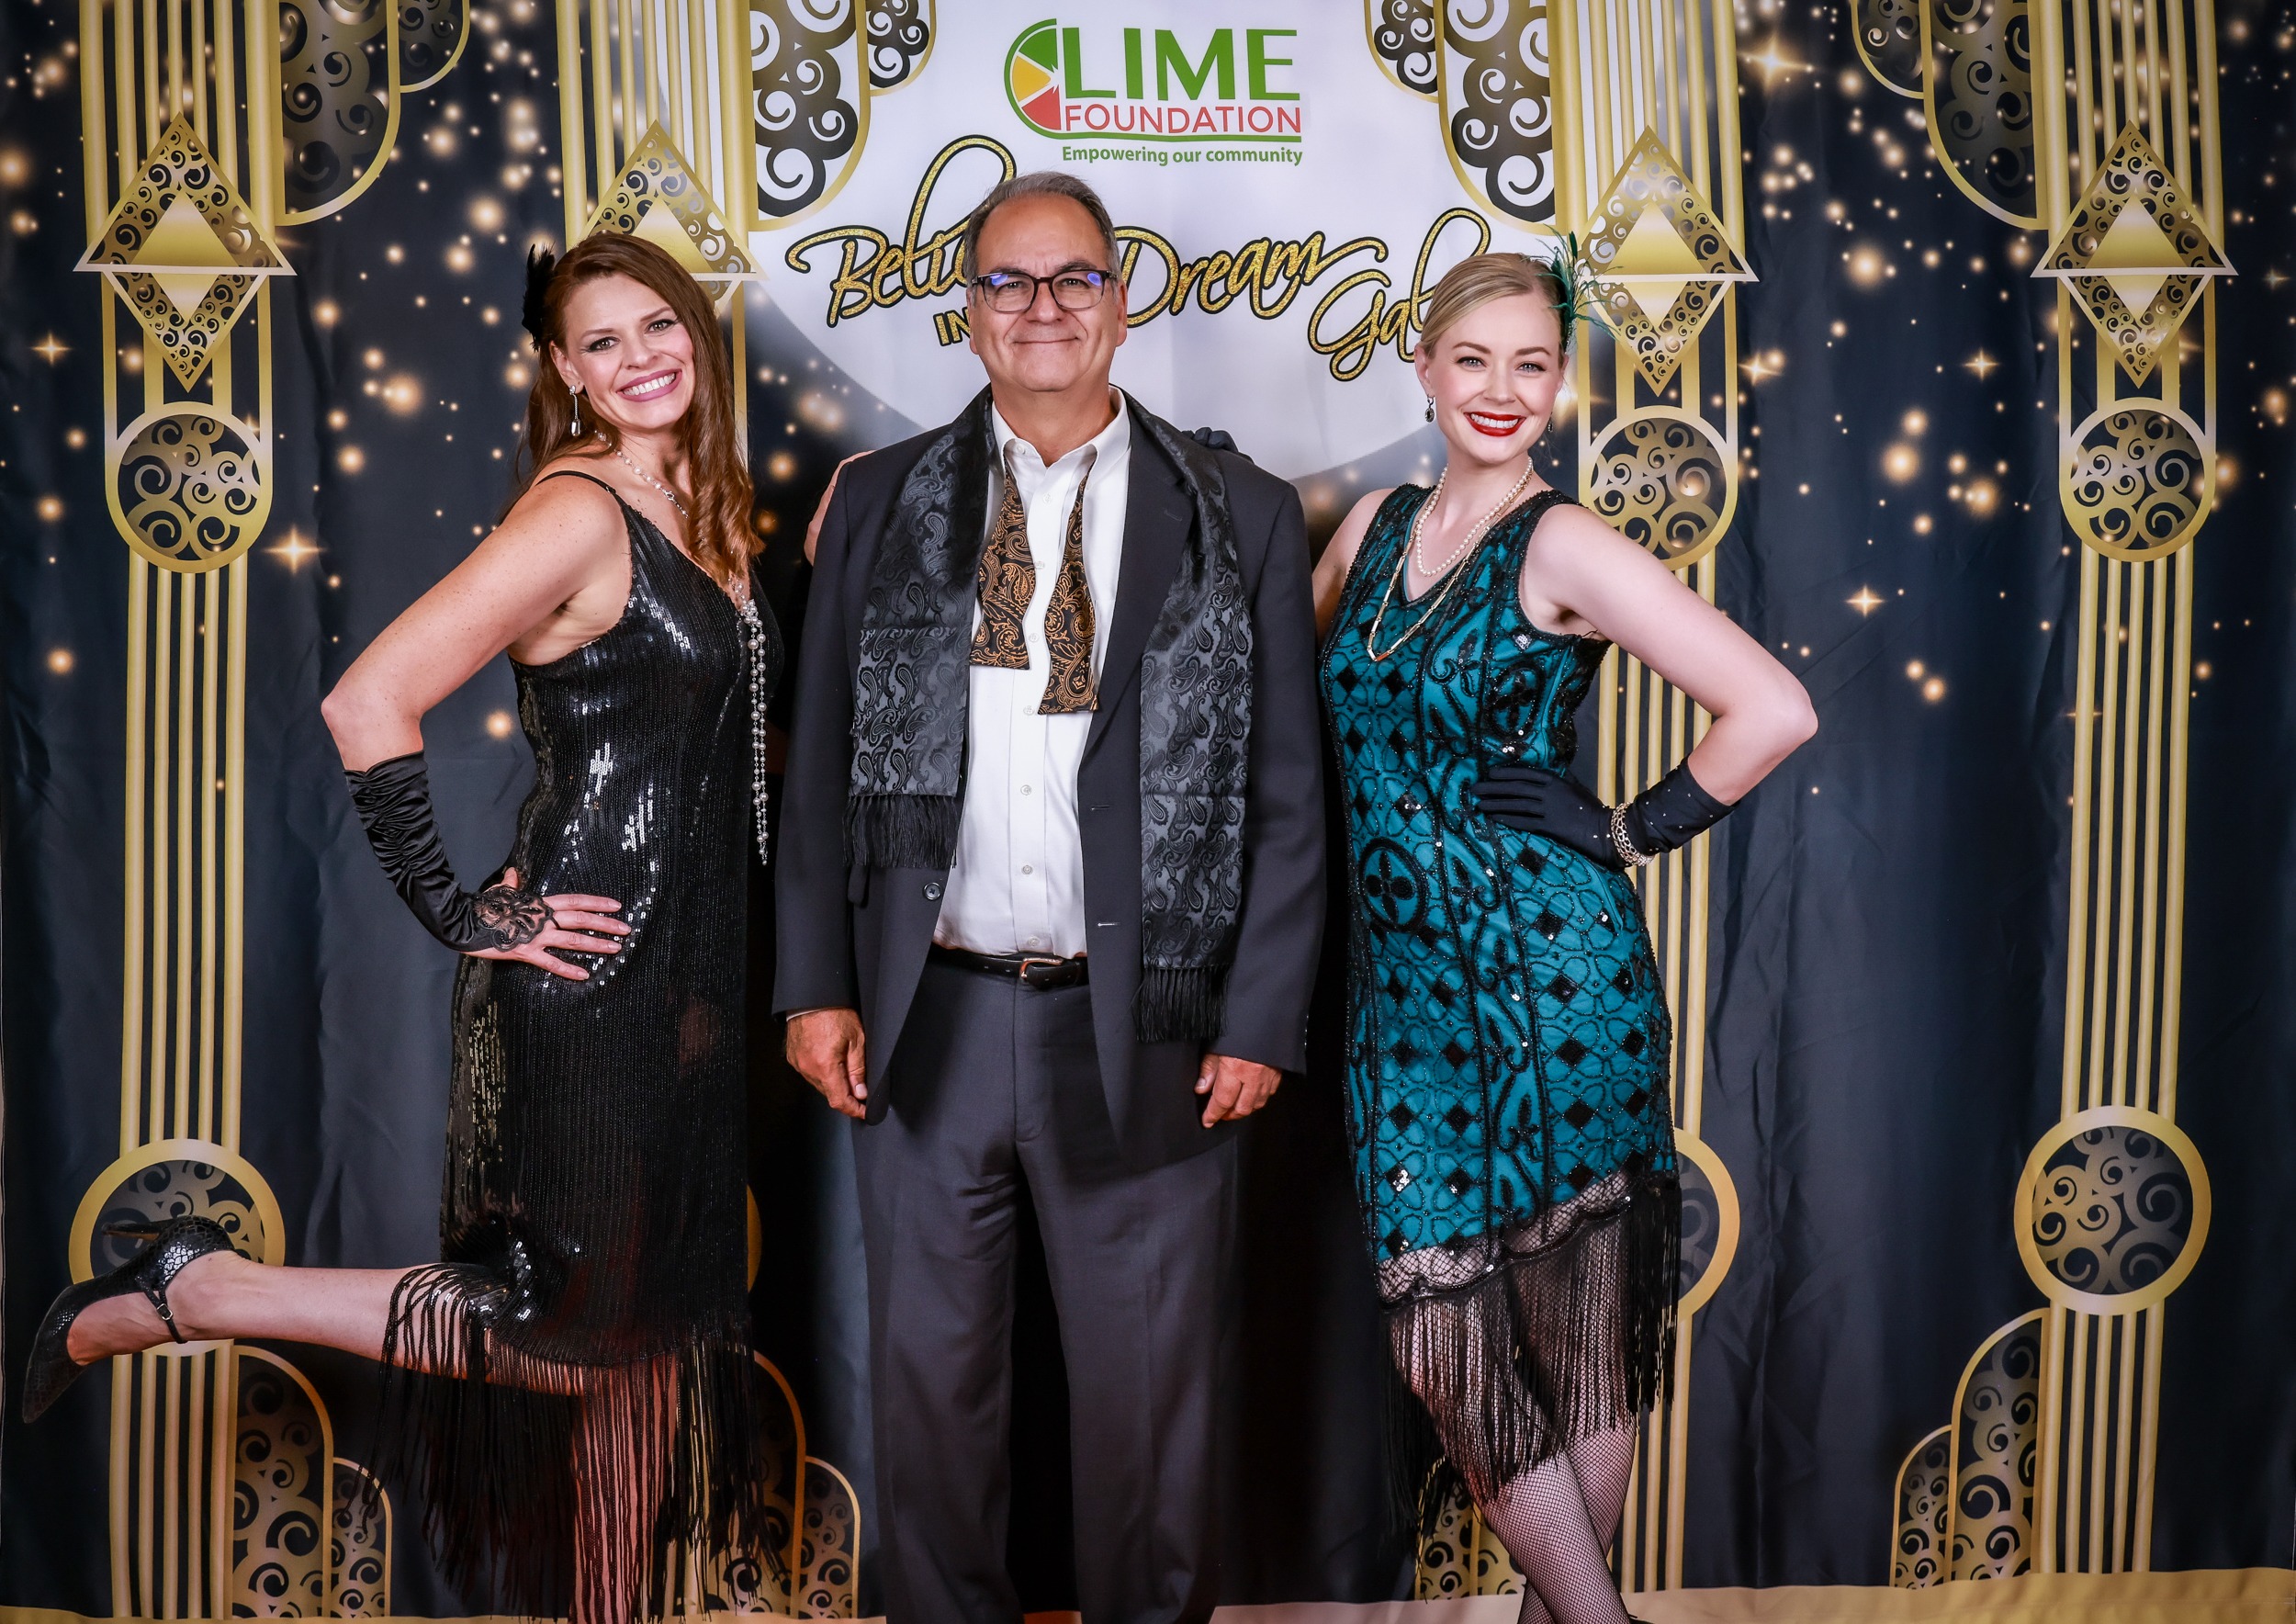 Three people posing for a photo at a 1920s themed party held by The LIME Foundation of Santa Rosa.